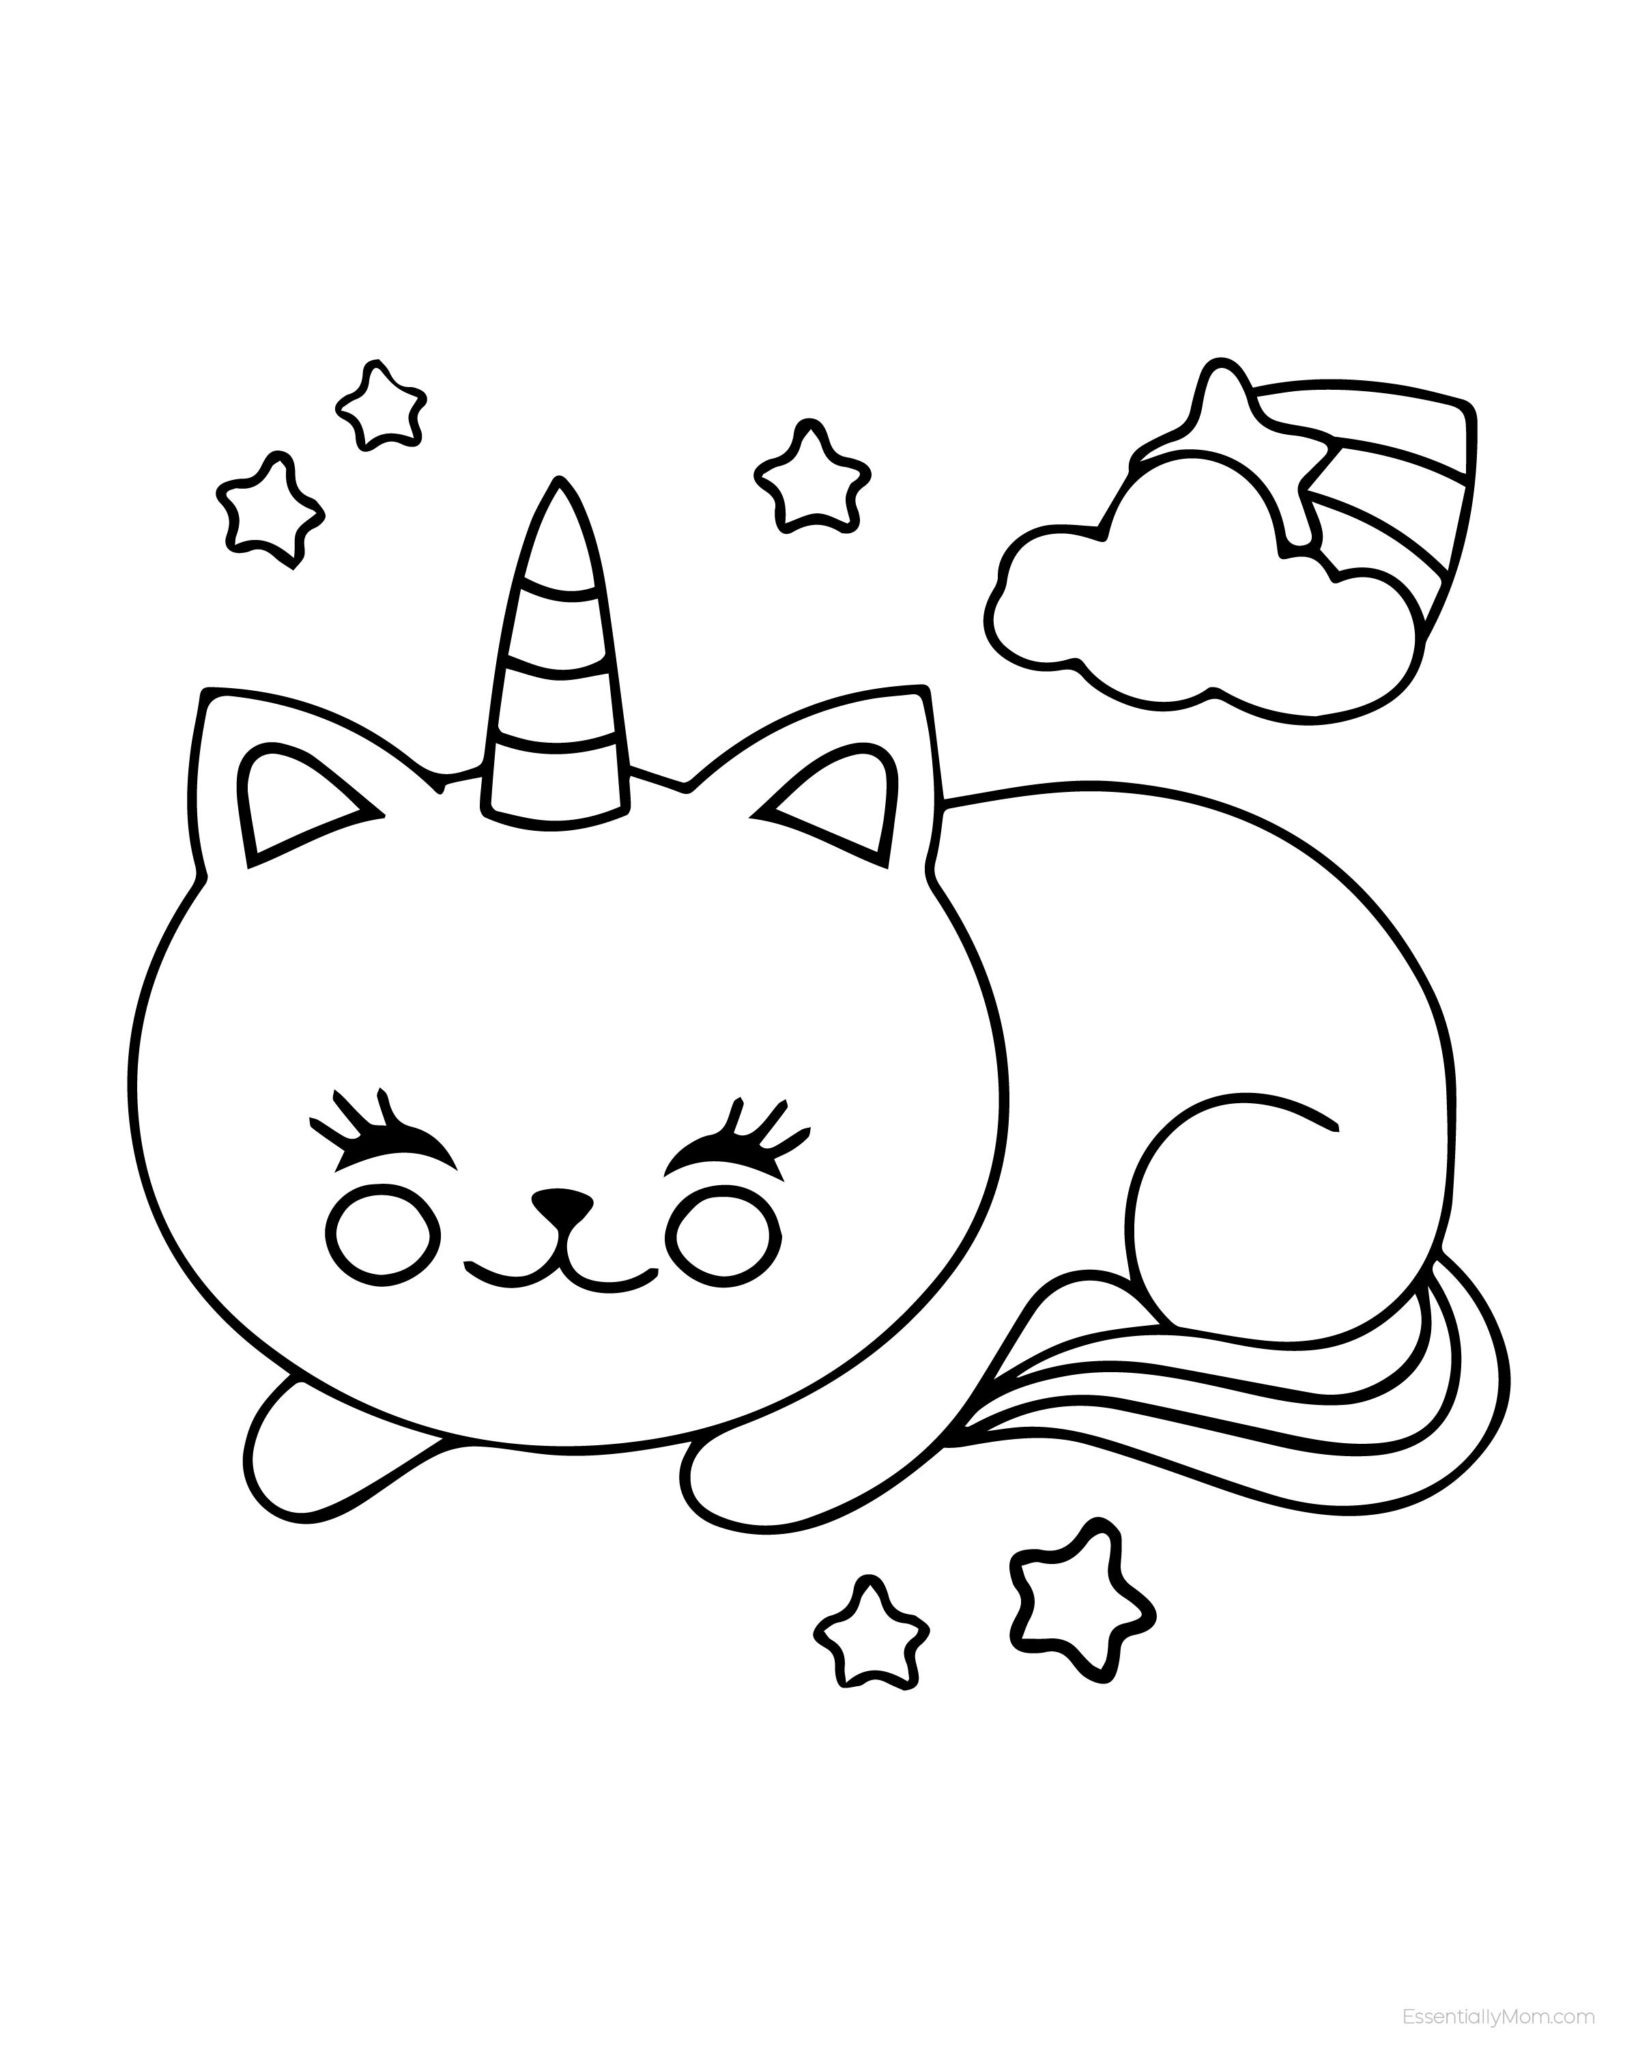 FREE Unicorn Coloring Pages Printable for Kids   Unicorn coloring book